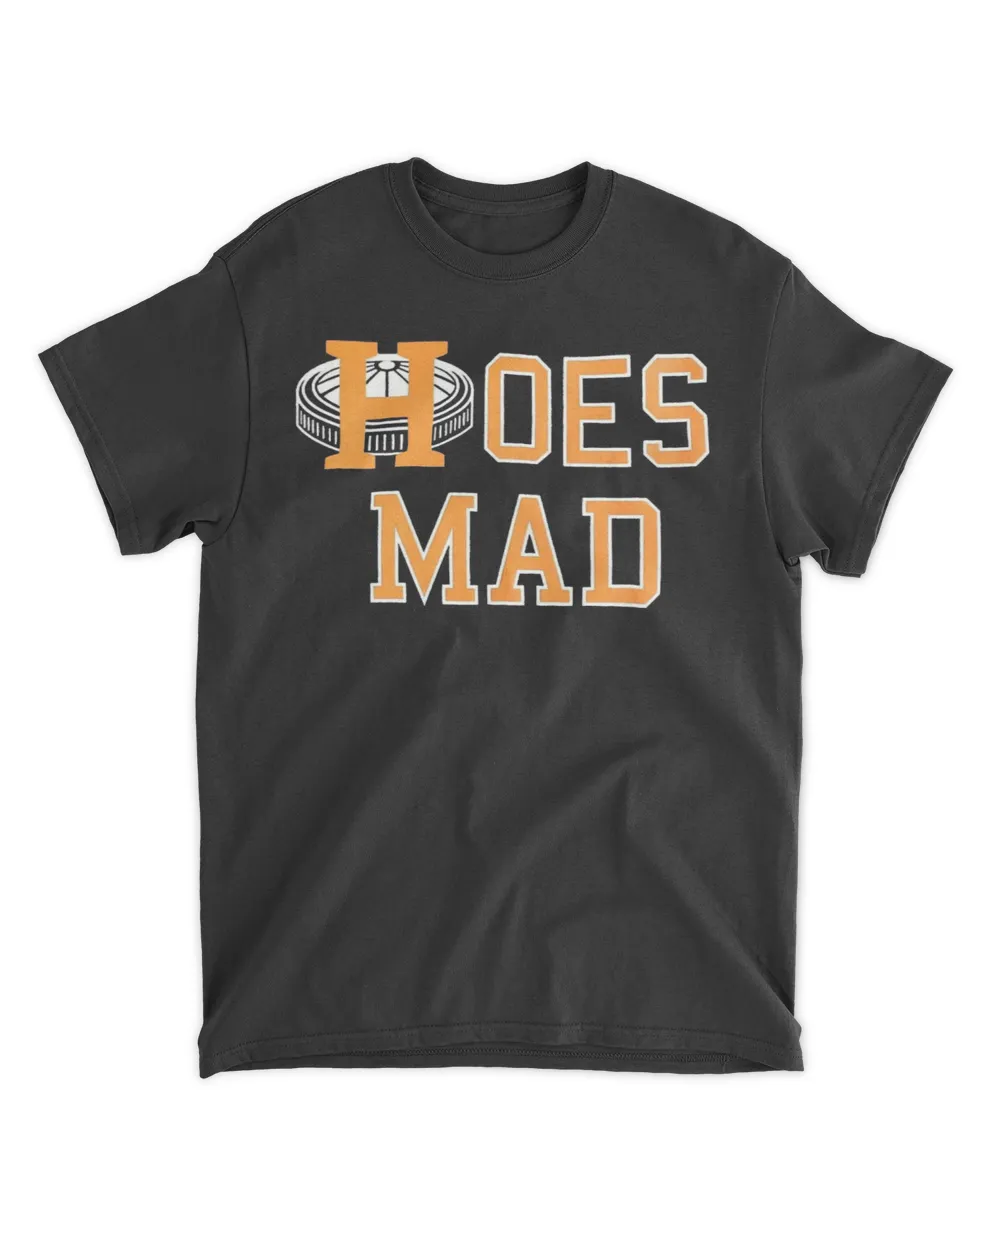  Hoes mad shirt